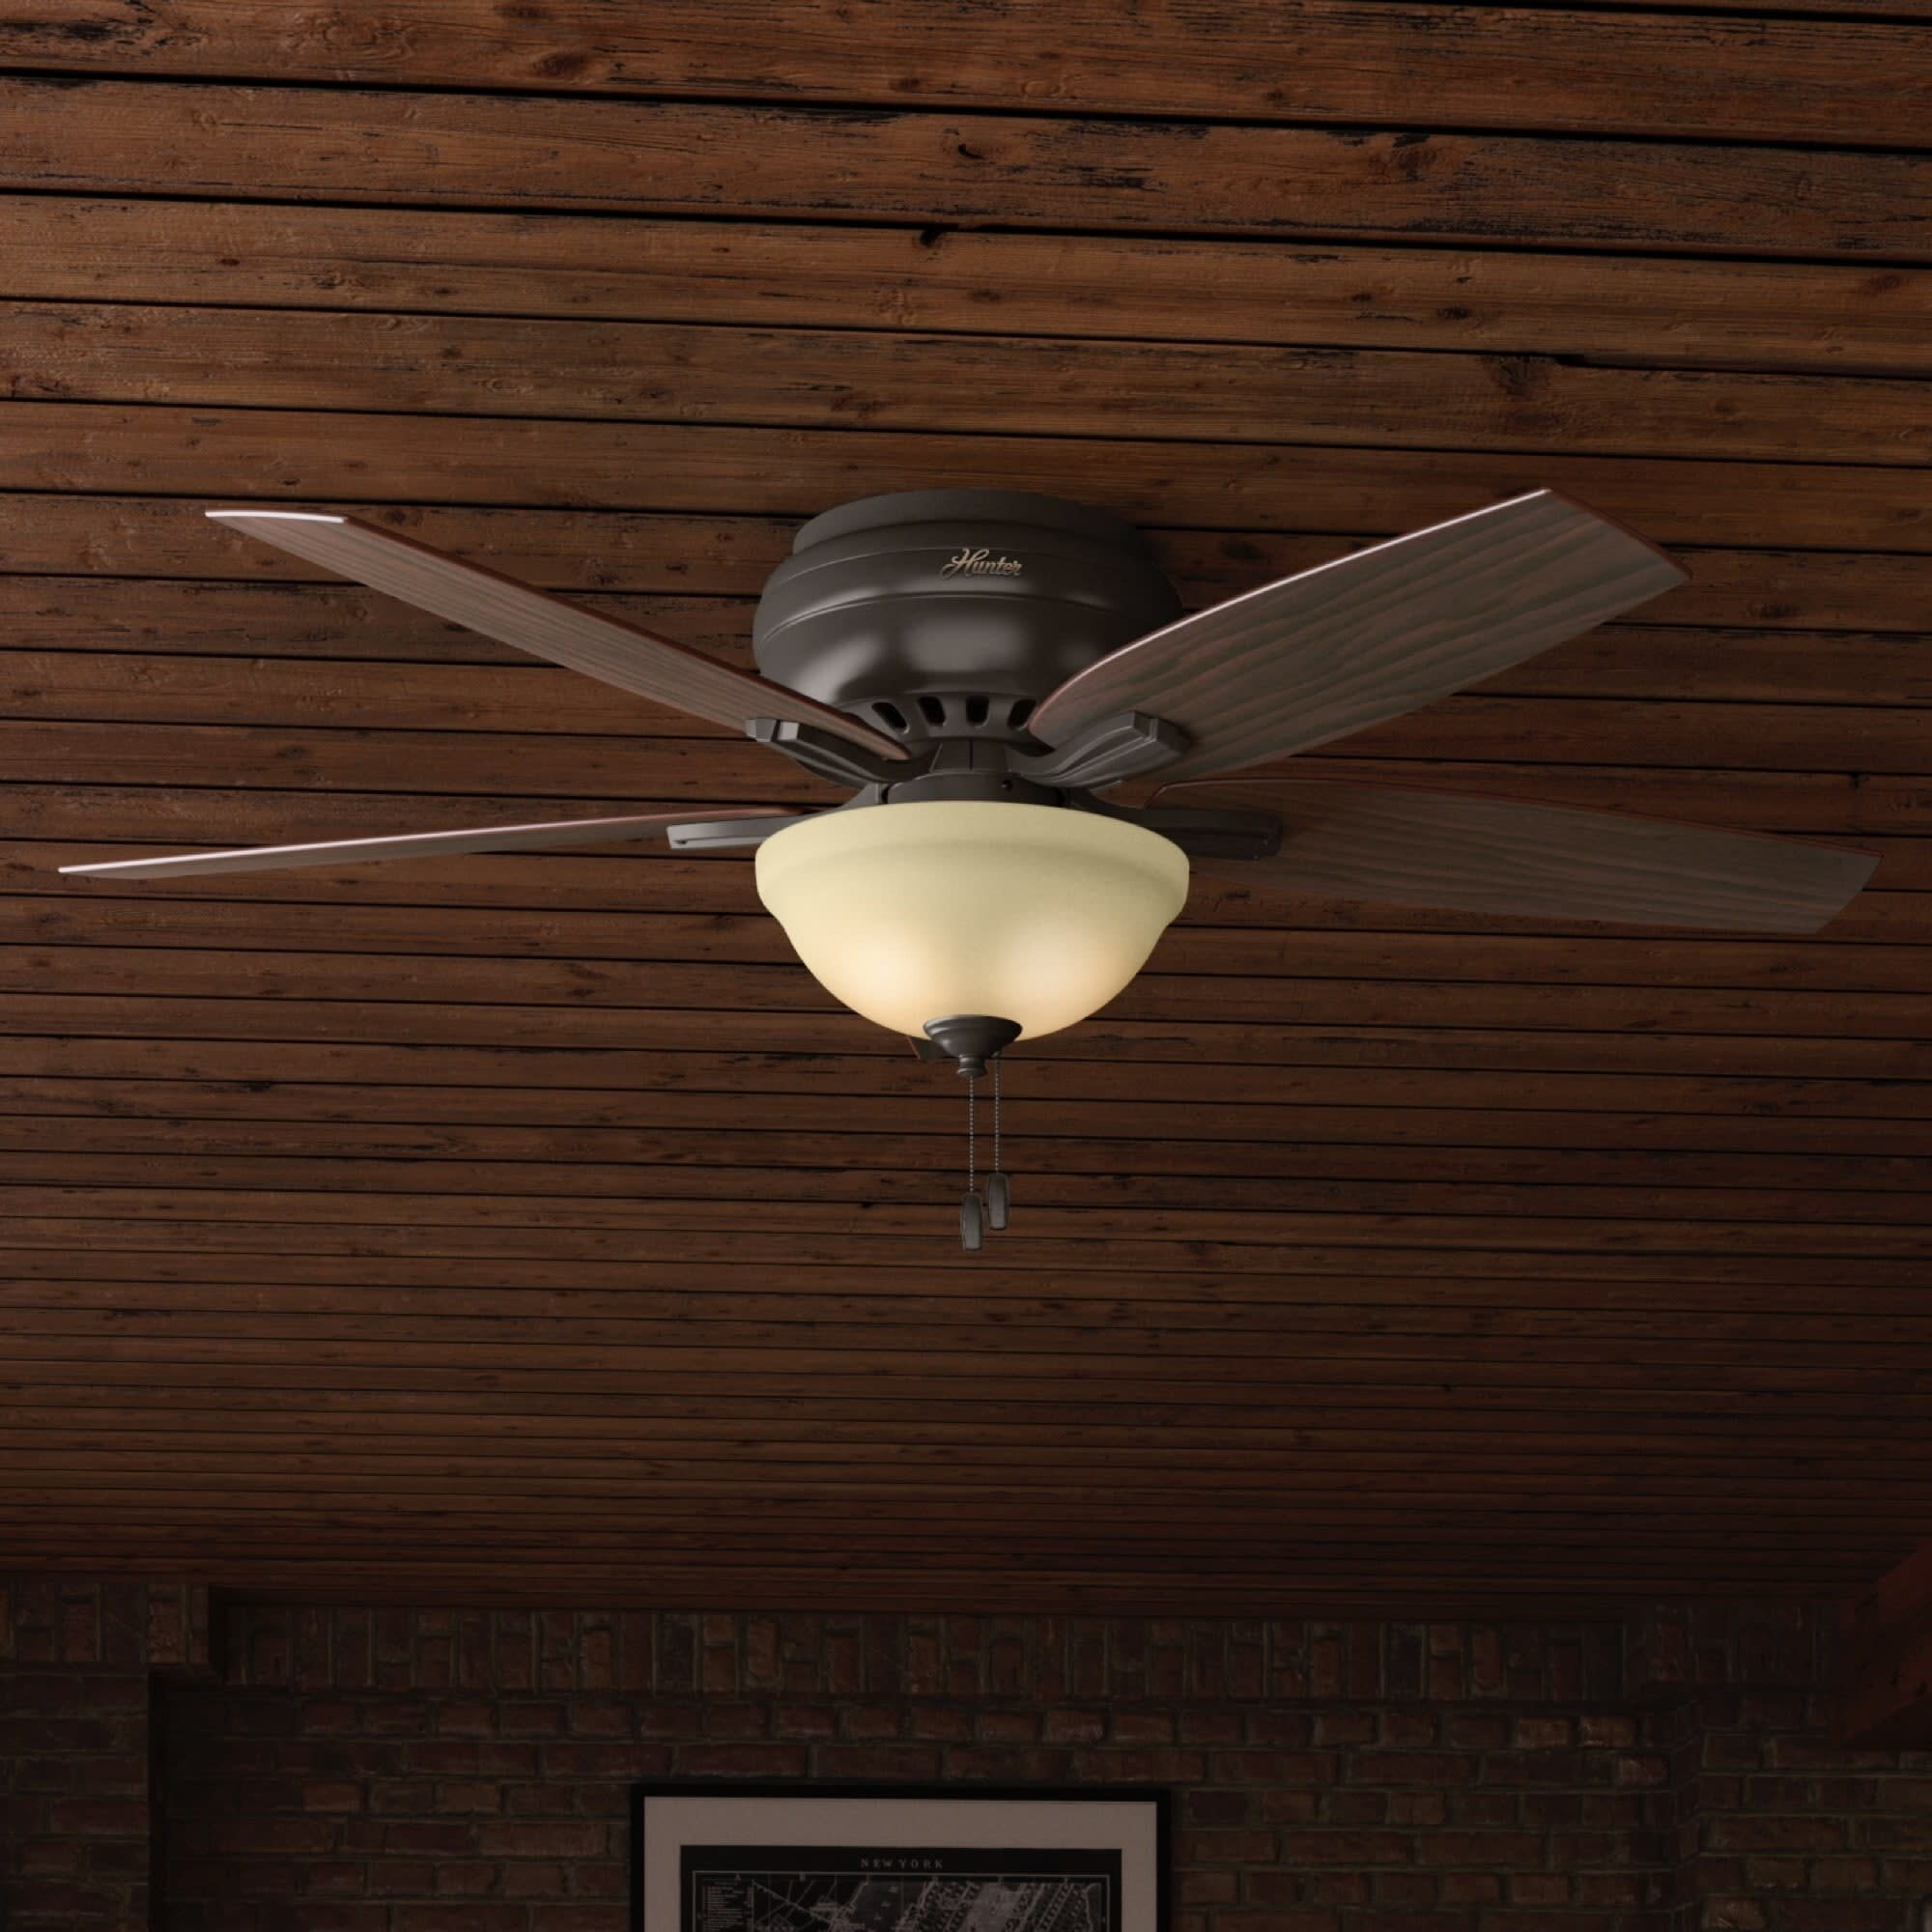 Hunter Fan 52 Newsome 5 Blade Flush Mount Ceiling Fan With Pull Chain And Light Kit Included Reviews Wayfair